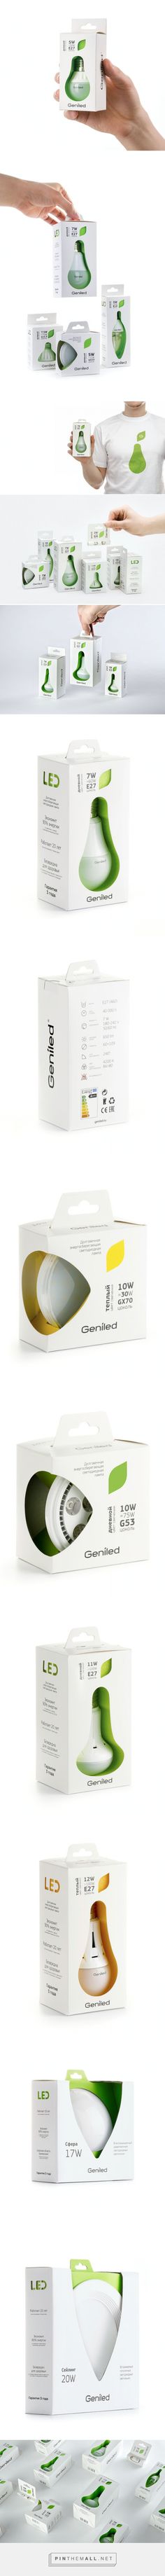 Geniled Long-running #Bulbs V1.0 #packaging designed by Evgeniy Pelin - http://www.packagingoftheworld.com/2015/03/geniled-long-running-bulbs-package-v10.html Bulb, Products, Electronic Packaging, Graphic Design Packaging, Packaging Labels, Led Bulb Packaging